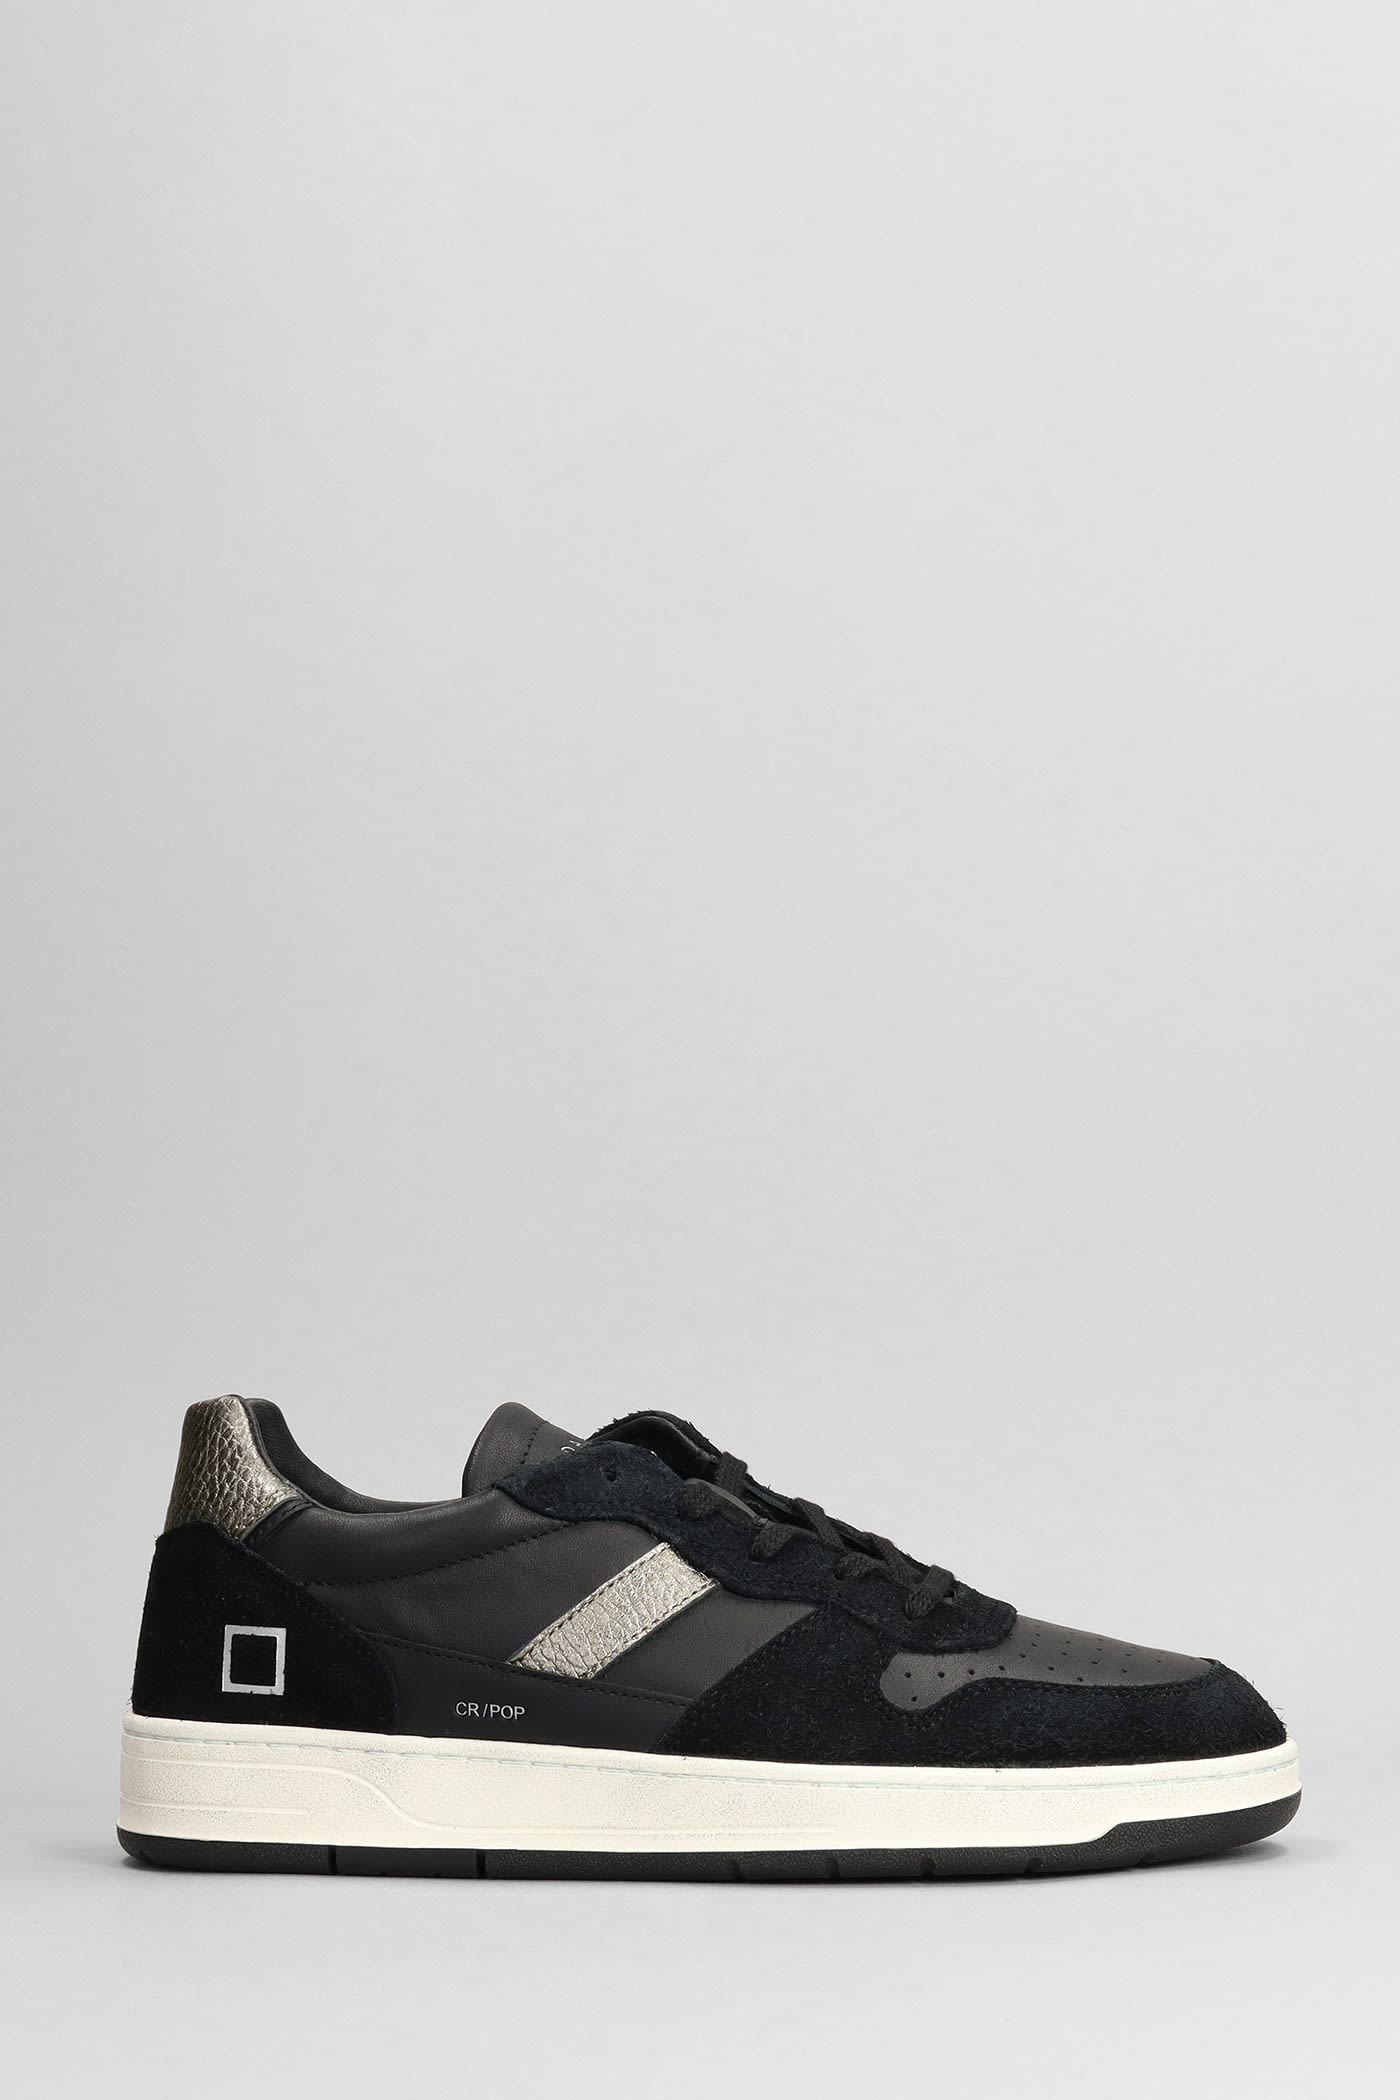 DATE COURT 2.0 SNEAKERS IN BLACK SUEDE AND LEATHER